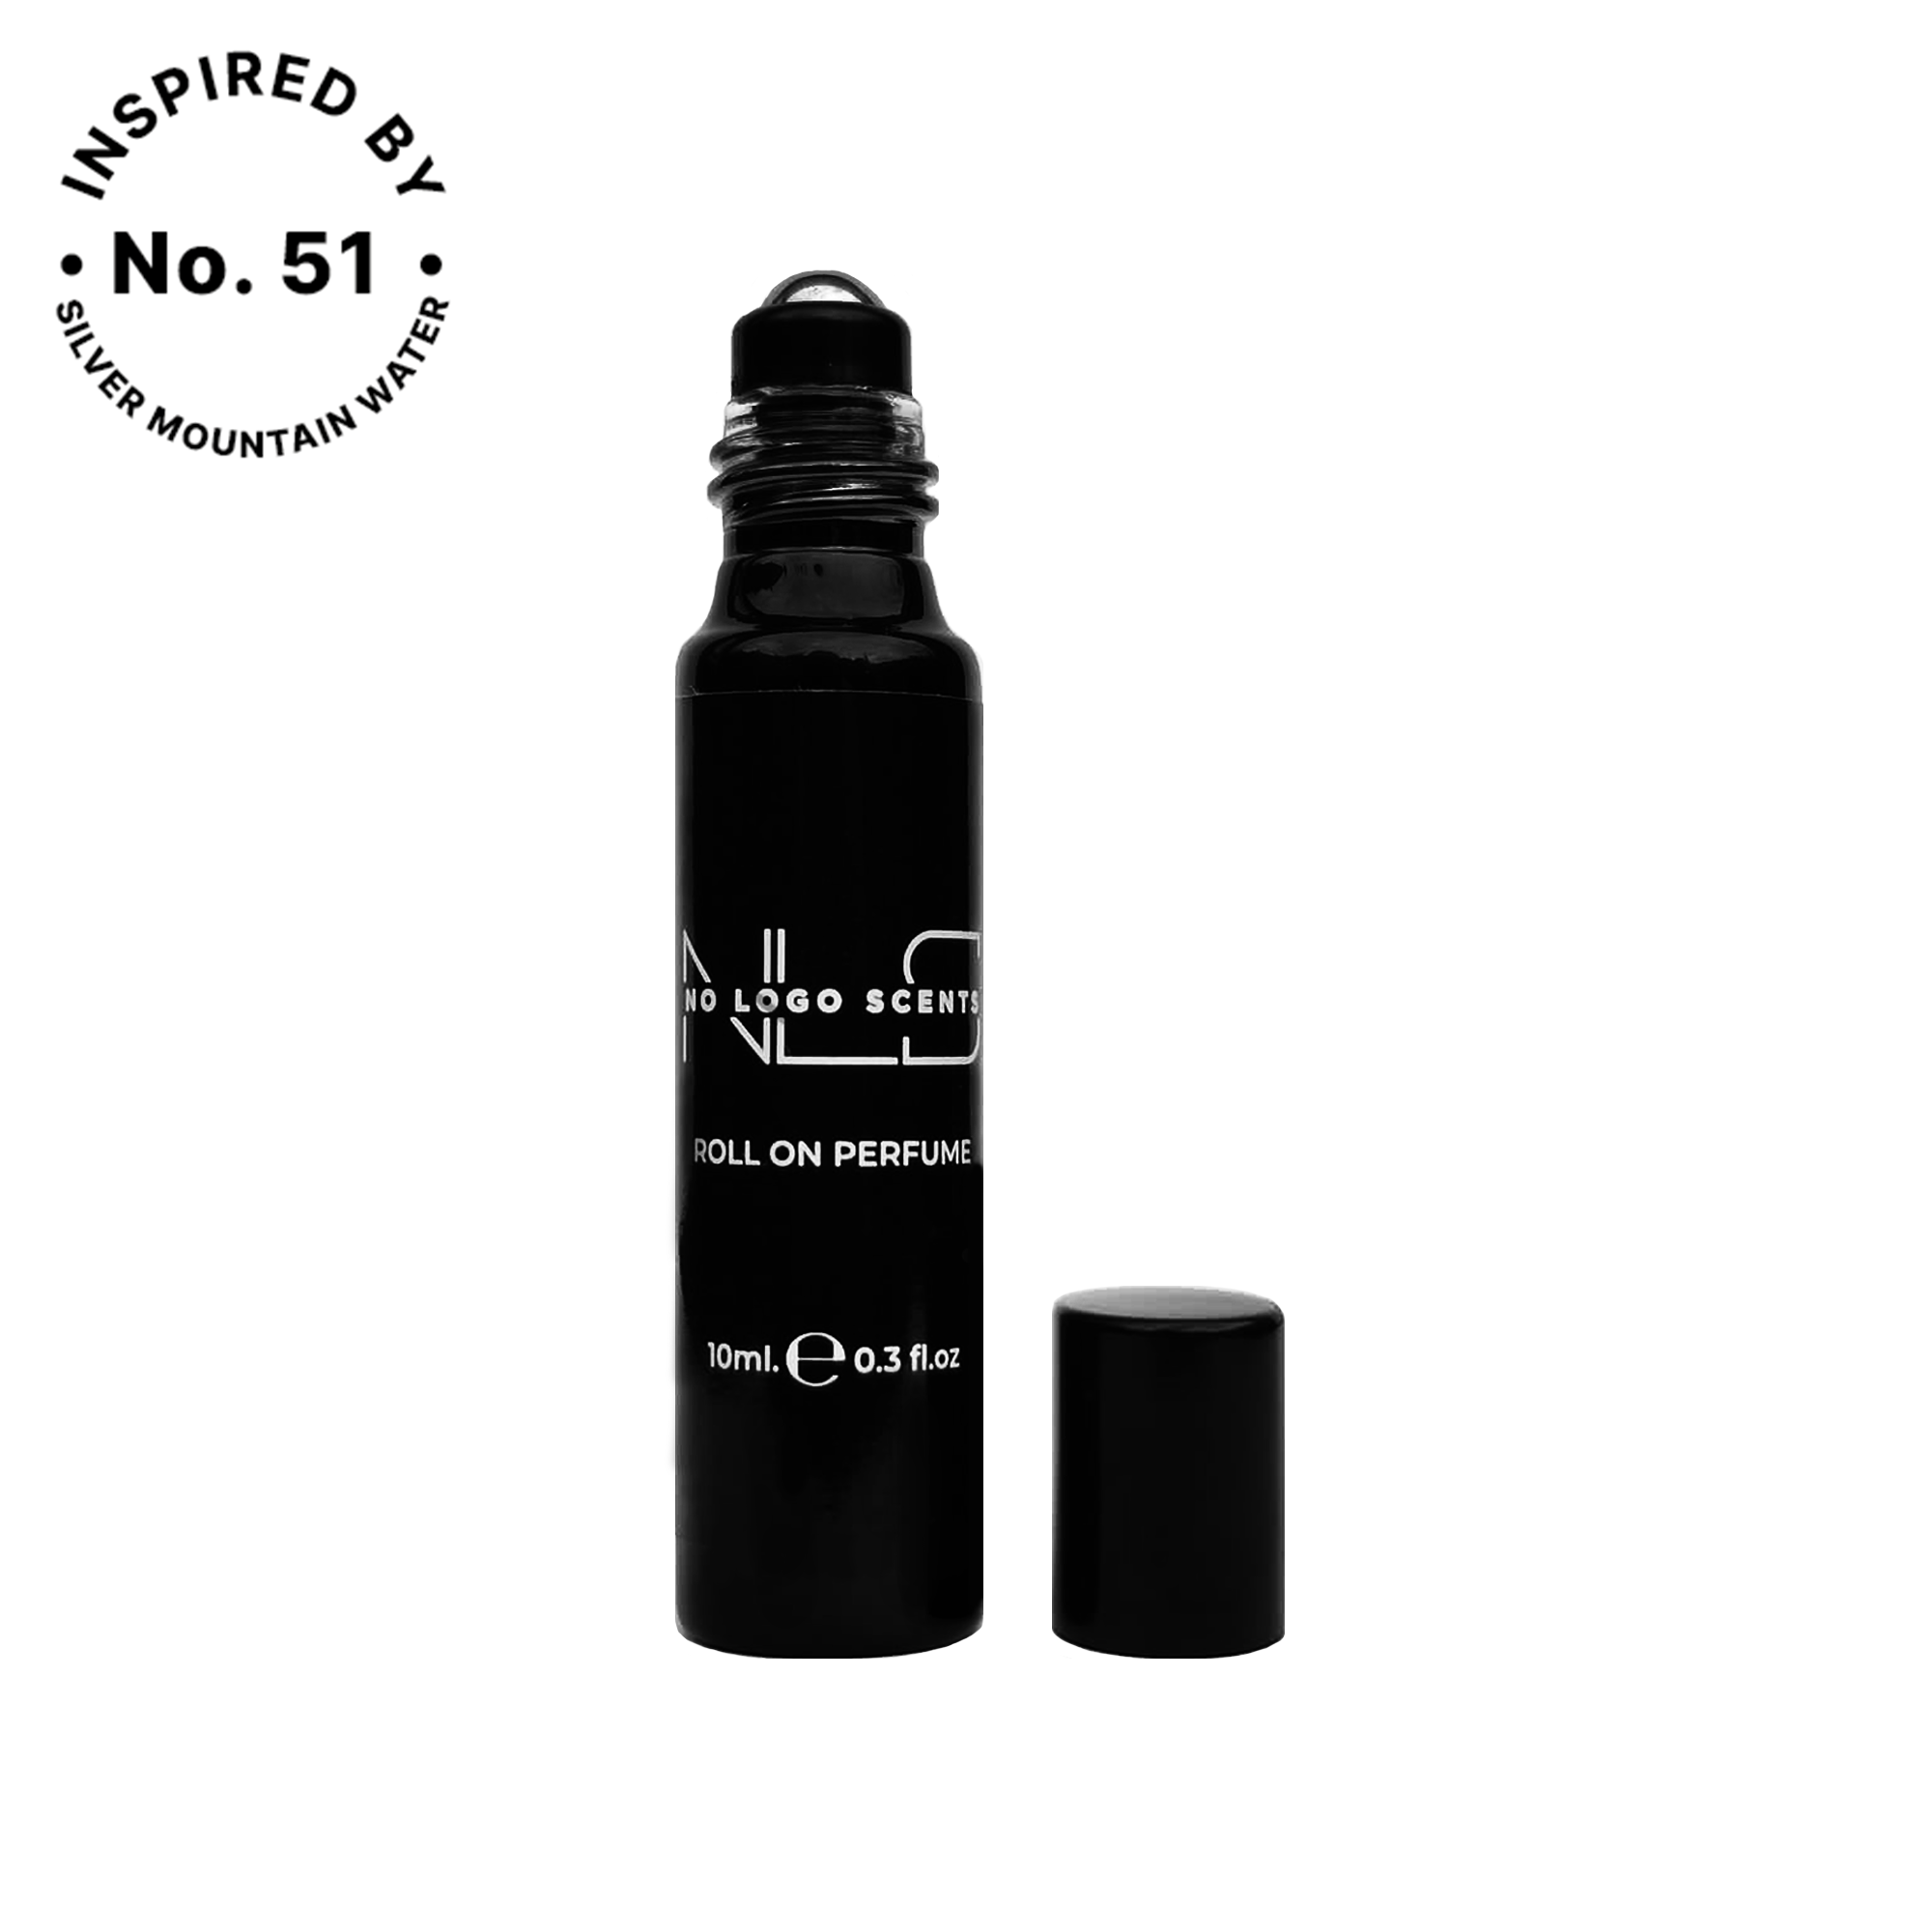 No.51 INSPIRED BY SILVER MOUNTAIN WATER from category MEN’S ROLL ON PERFUMES - 1